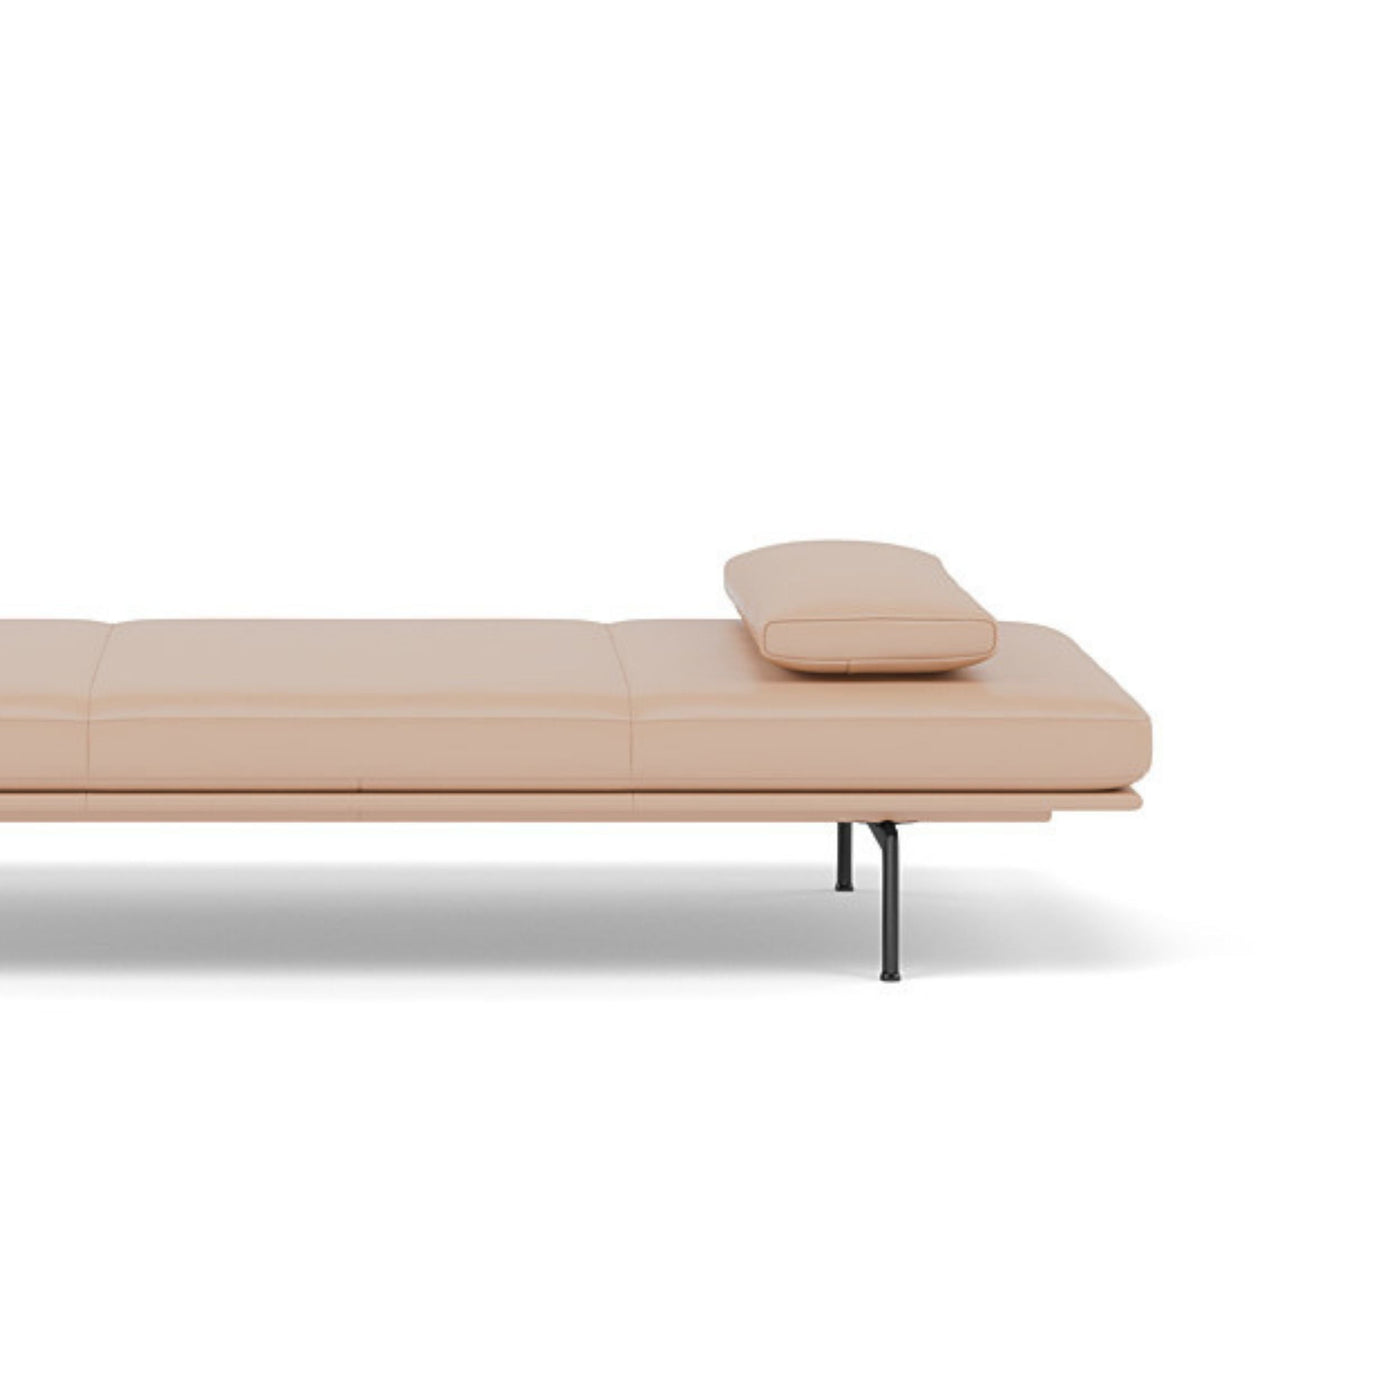 Muuto Outline Daybed Cushion, 70x30cm in beige refine leather. Shop online at someday designs. #colour_beige-refine-leather